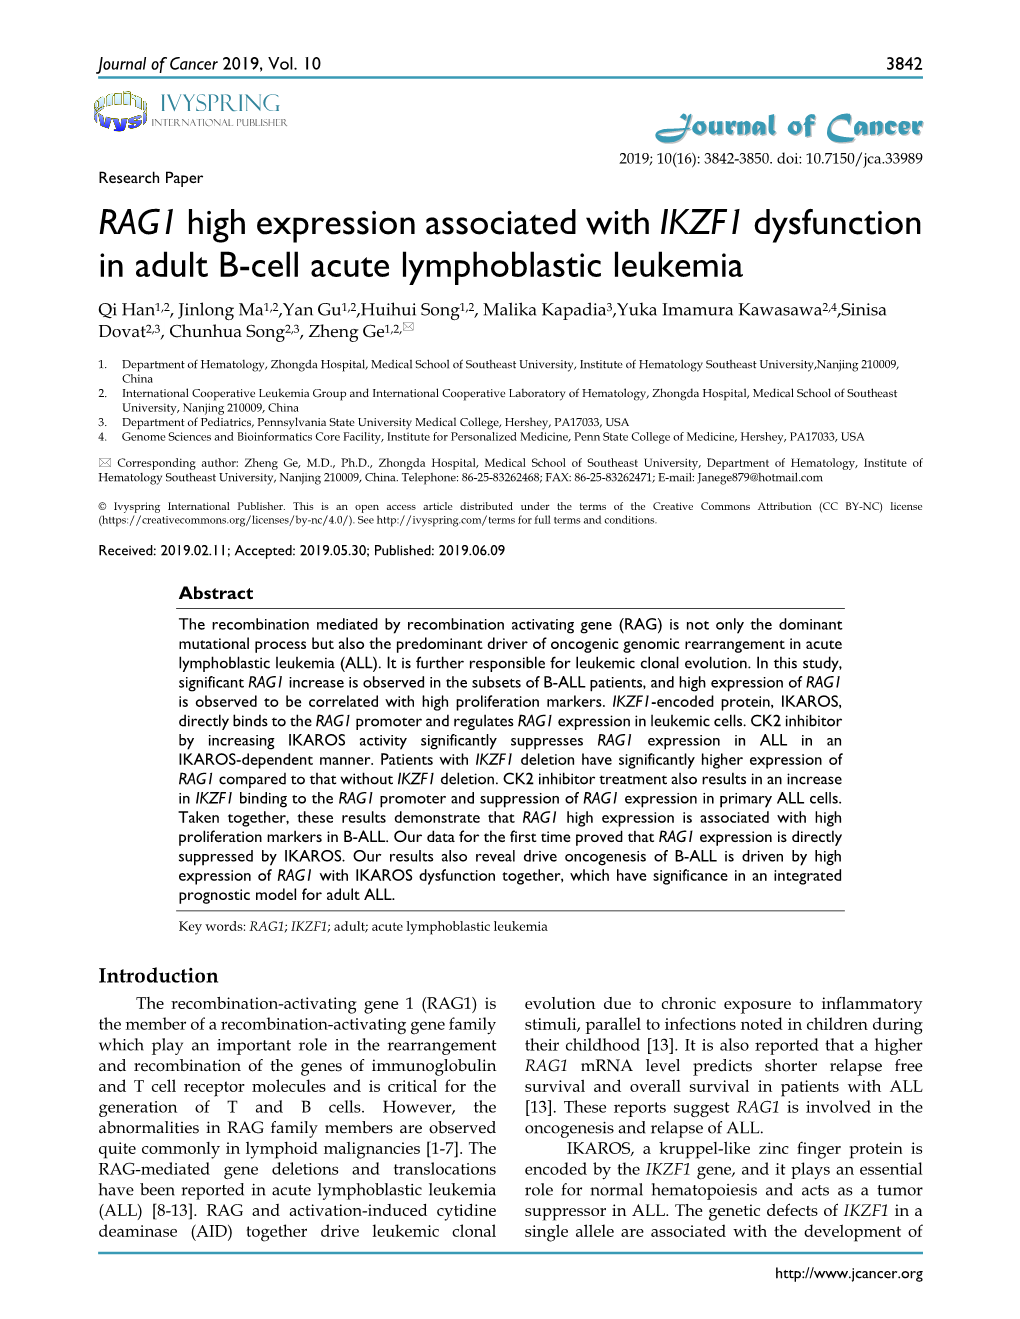 RAG1 High Expression Associated with IKZF1 Dysfunction in Adult B